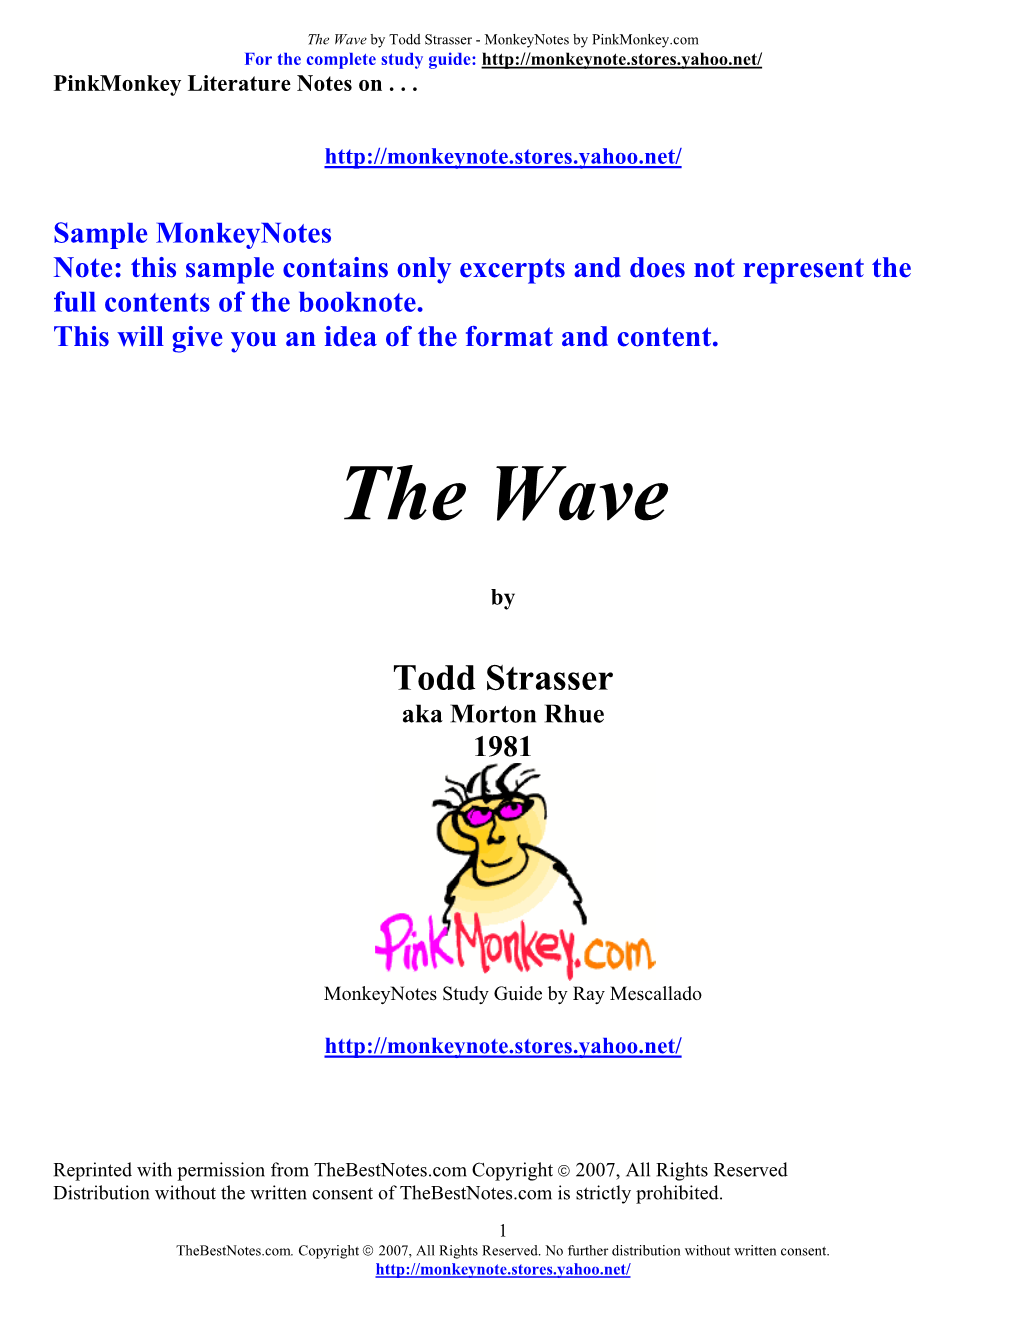 The Wave by Todd Strasser - Monkeynotes by Pinkmonkey.Com for the Complete Study Guide: Pinkmonkey Literature Notes On